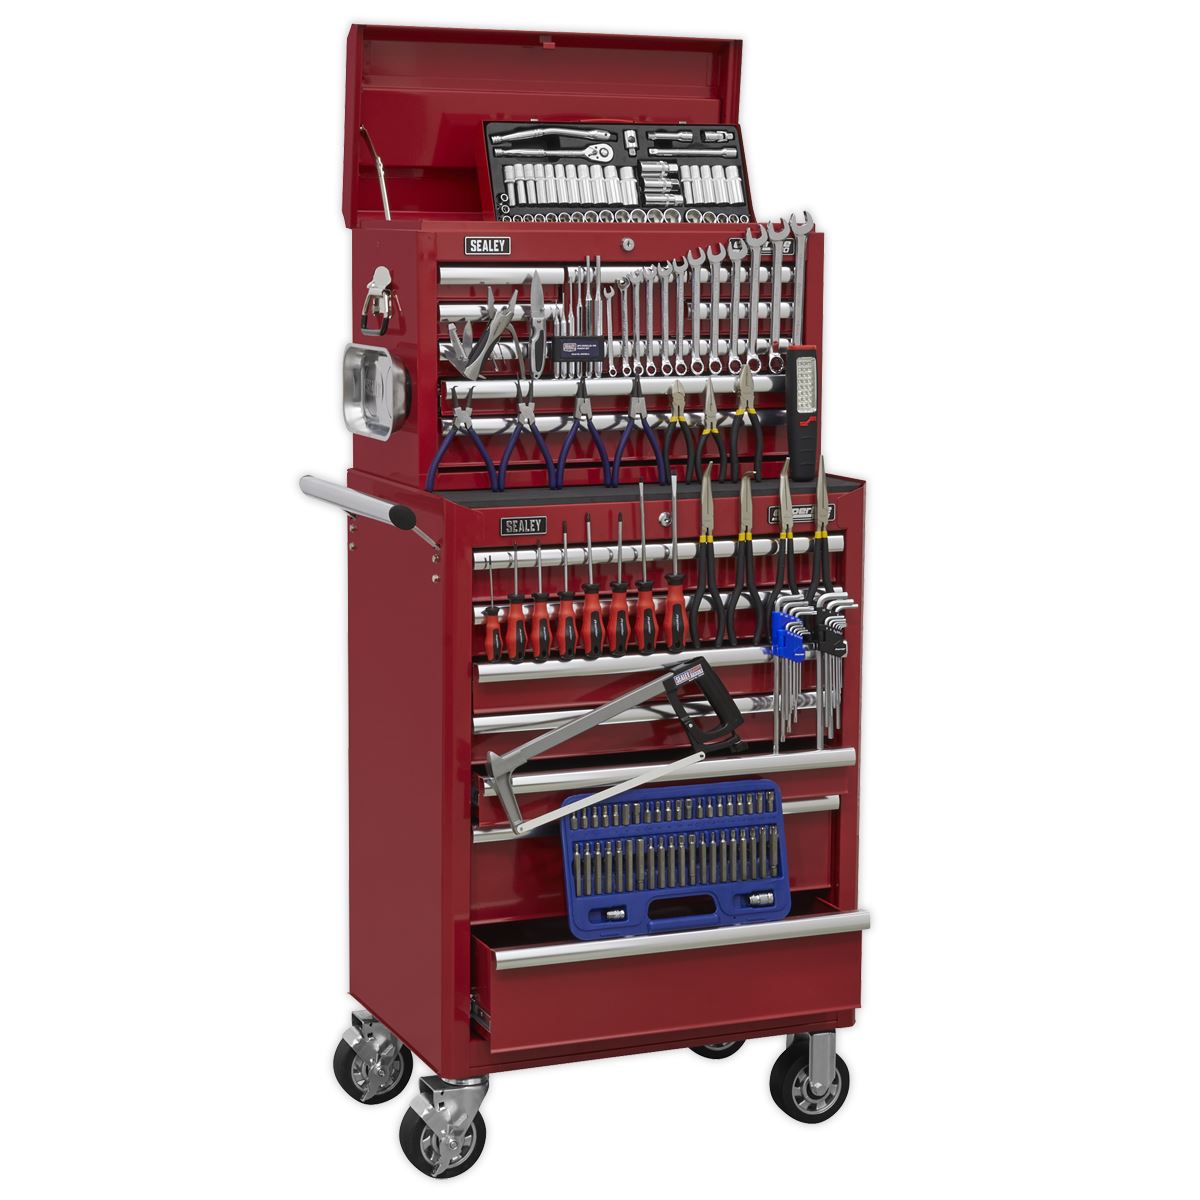 Sealey Superline Pro Topchest & Rollcab Combination 15 Drawer with Ball-Bearing Slides - Red & 148pc Tool Kit